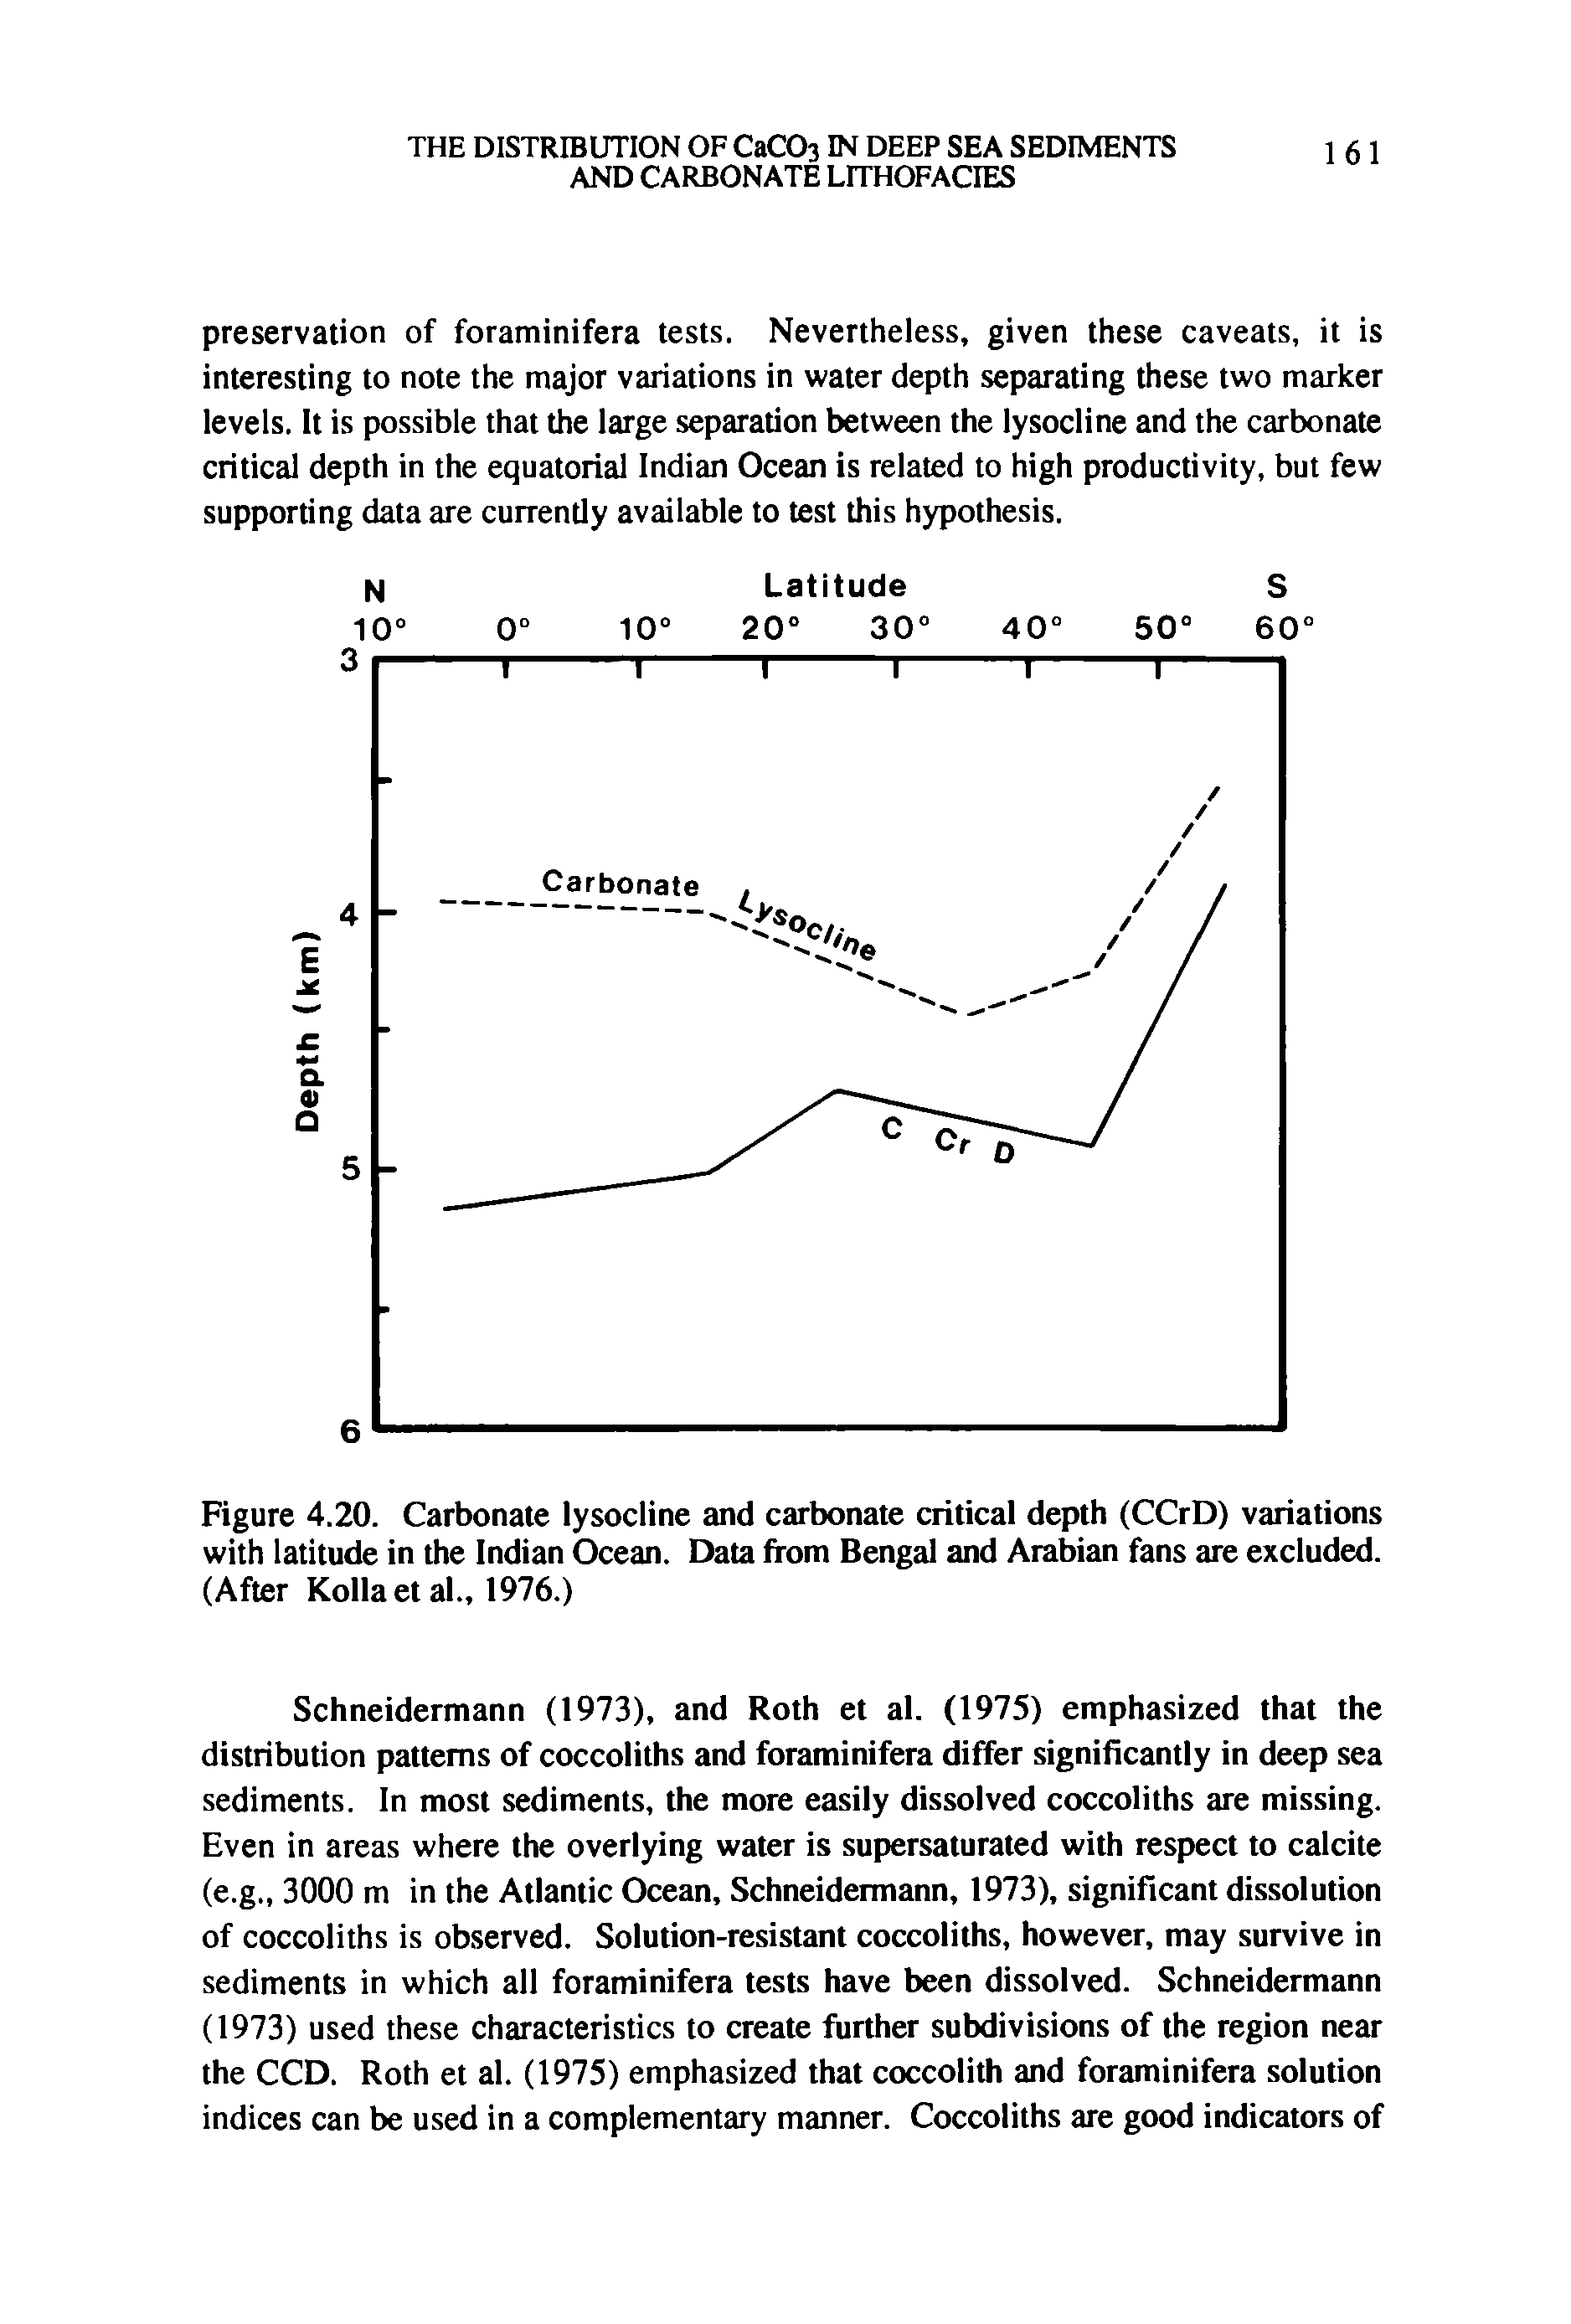 Figure 4.20. Carbonate lysocline and carbonate critical depth (CCrD) variations with latitude in the Indian Ocean. Data from Bengal and Arabian fans are excluded. (After Kolia et al., 1976.)...